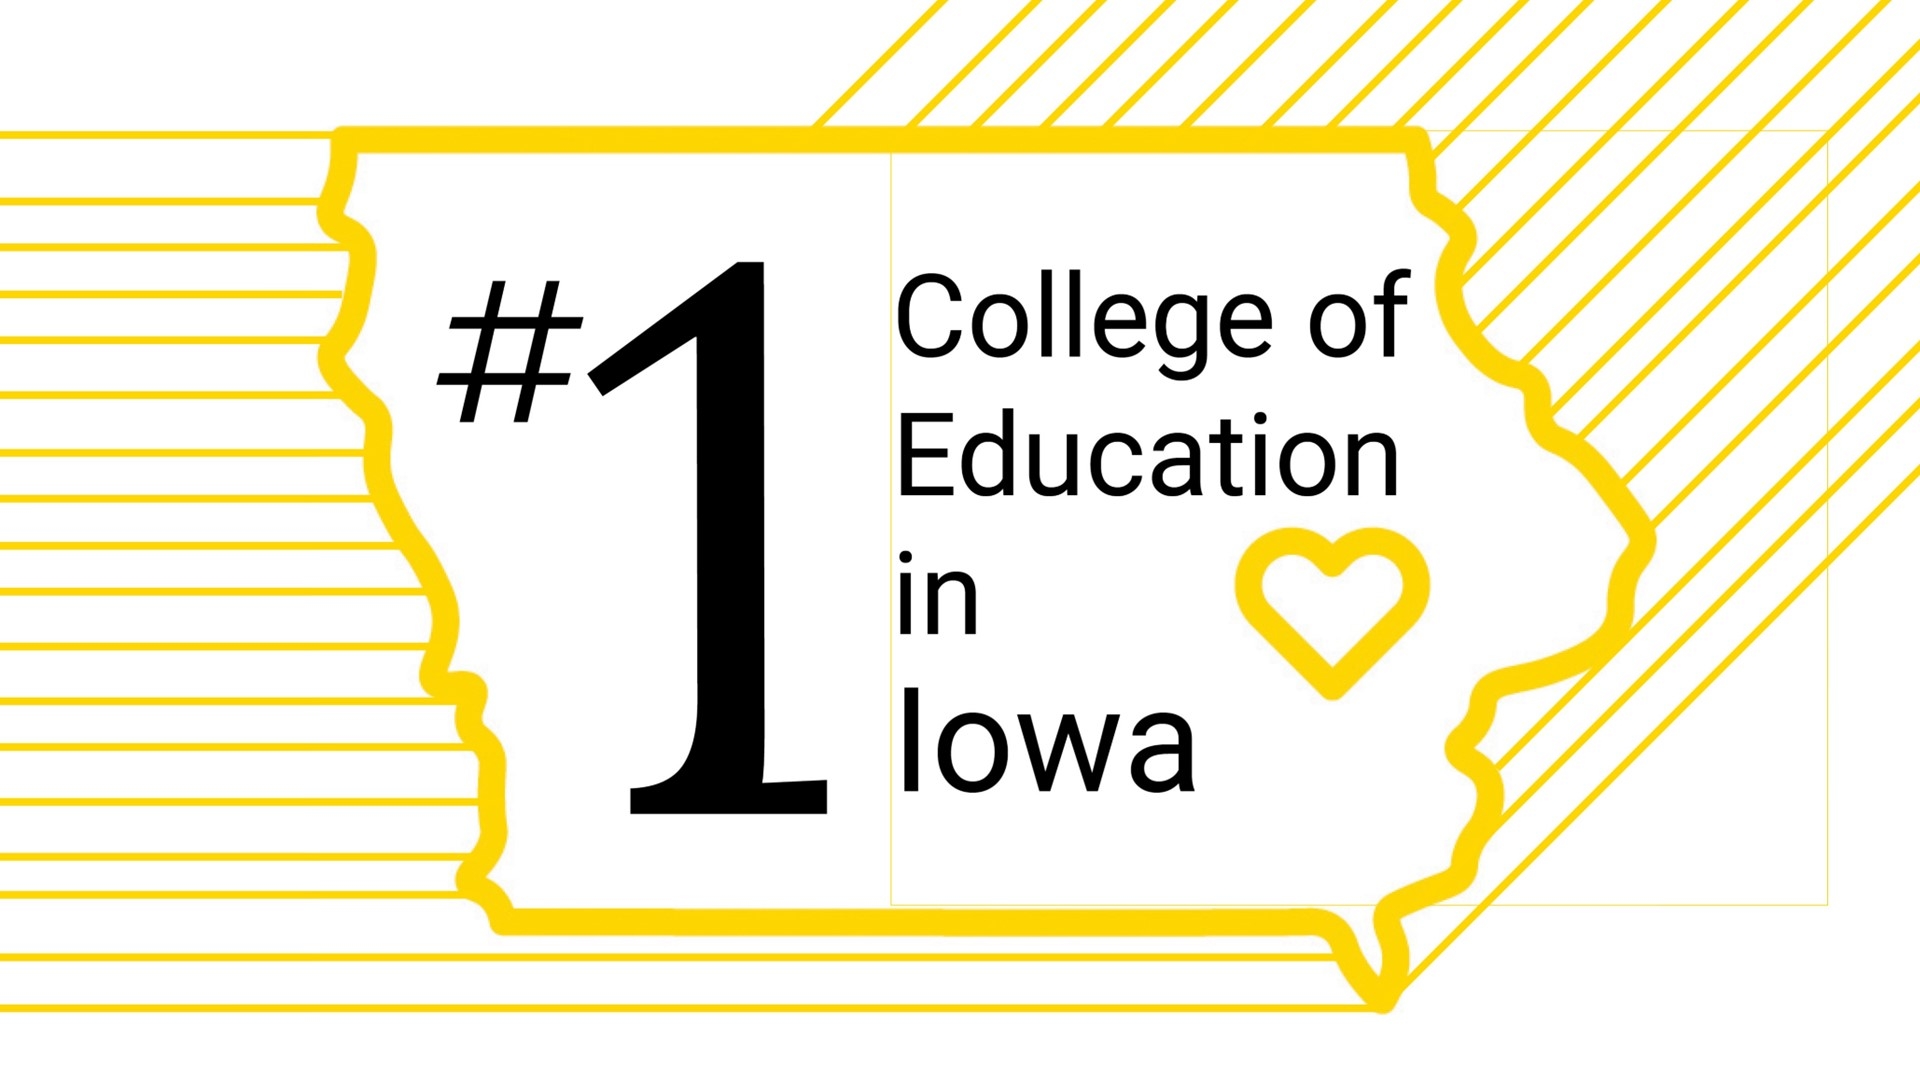 Number one college of education in Iowa.